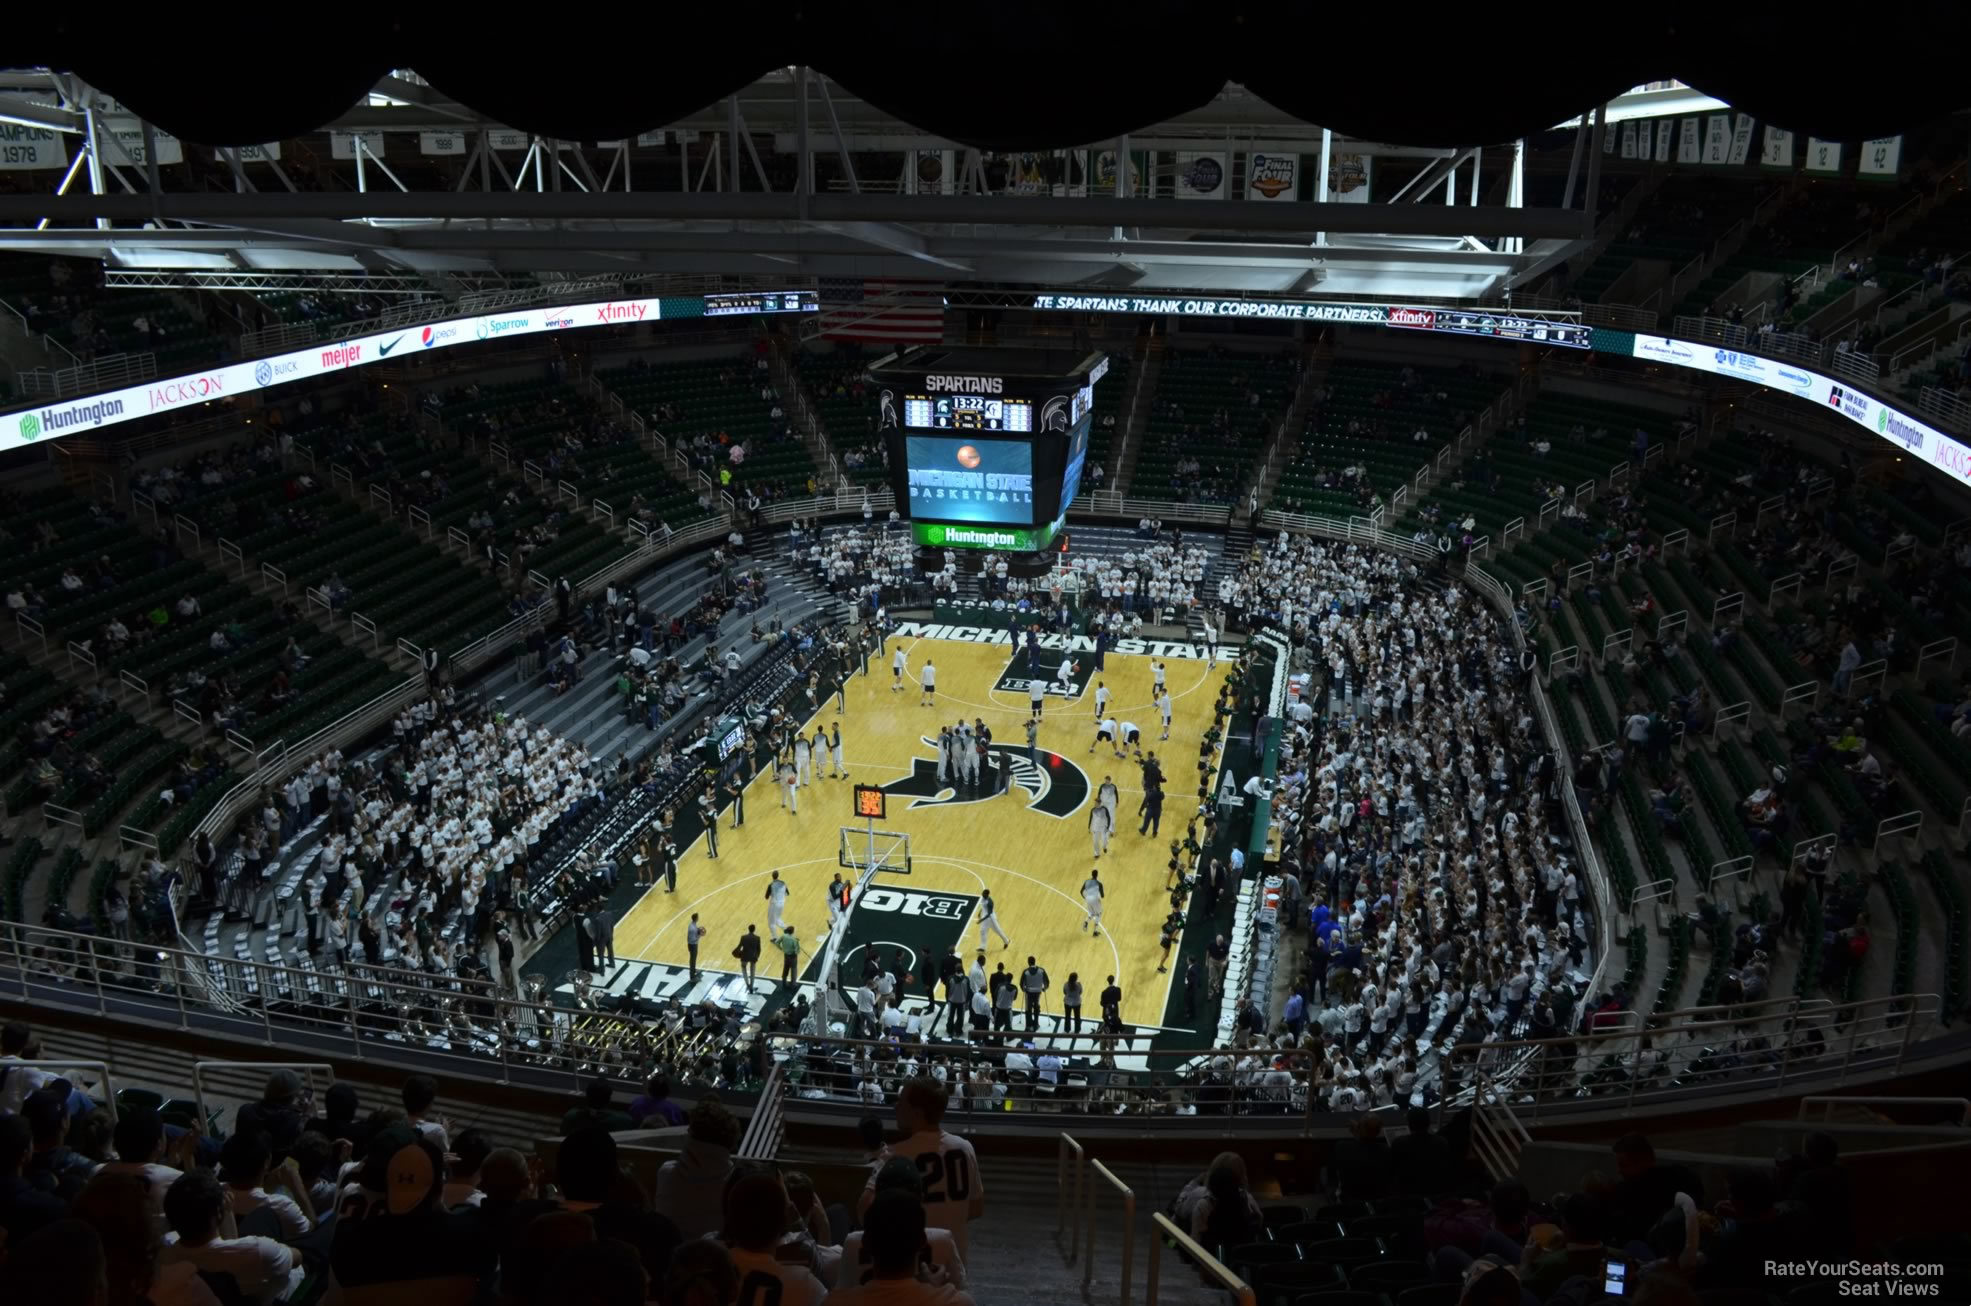 section 217, row 15 seat view  - breslin center